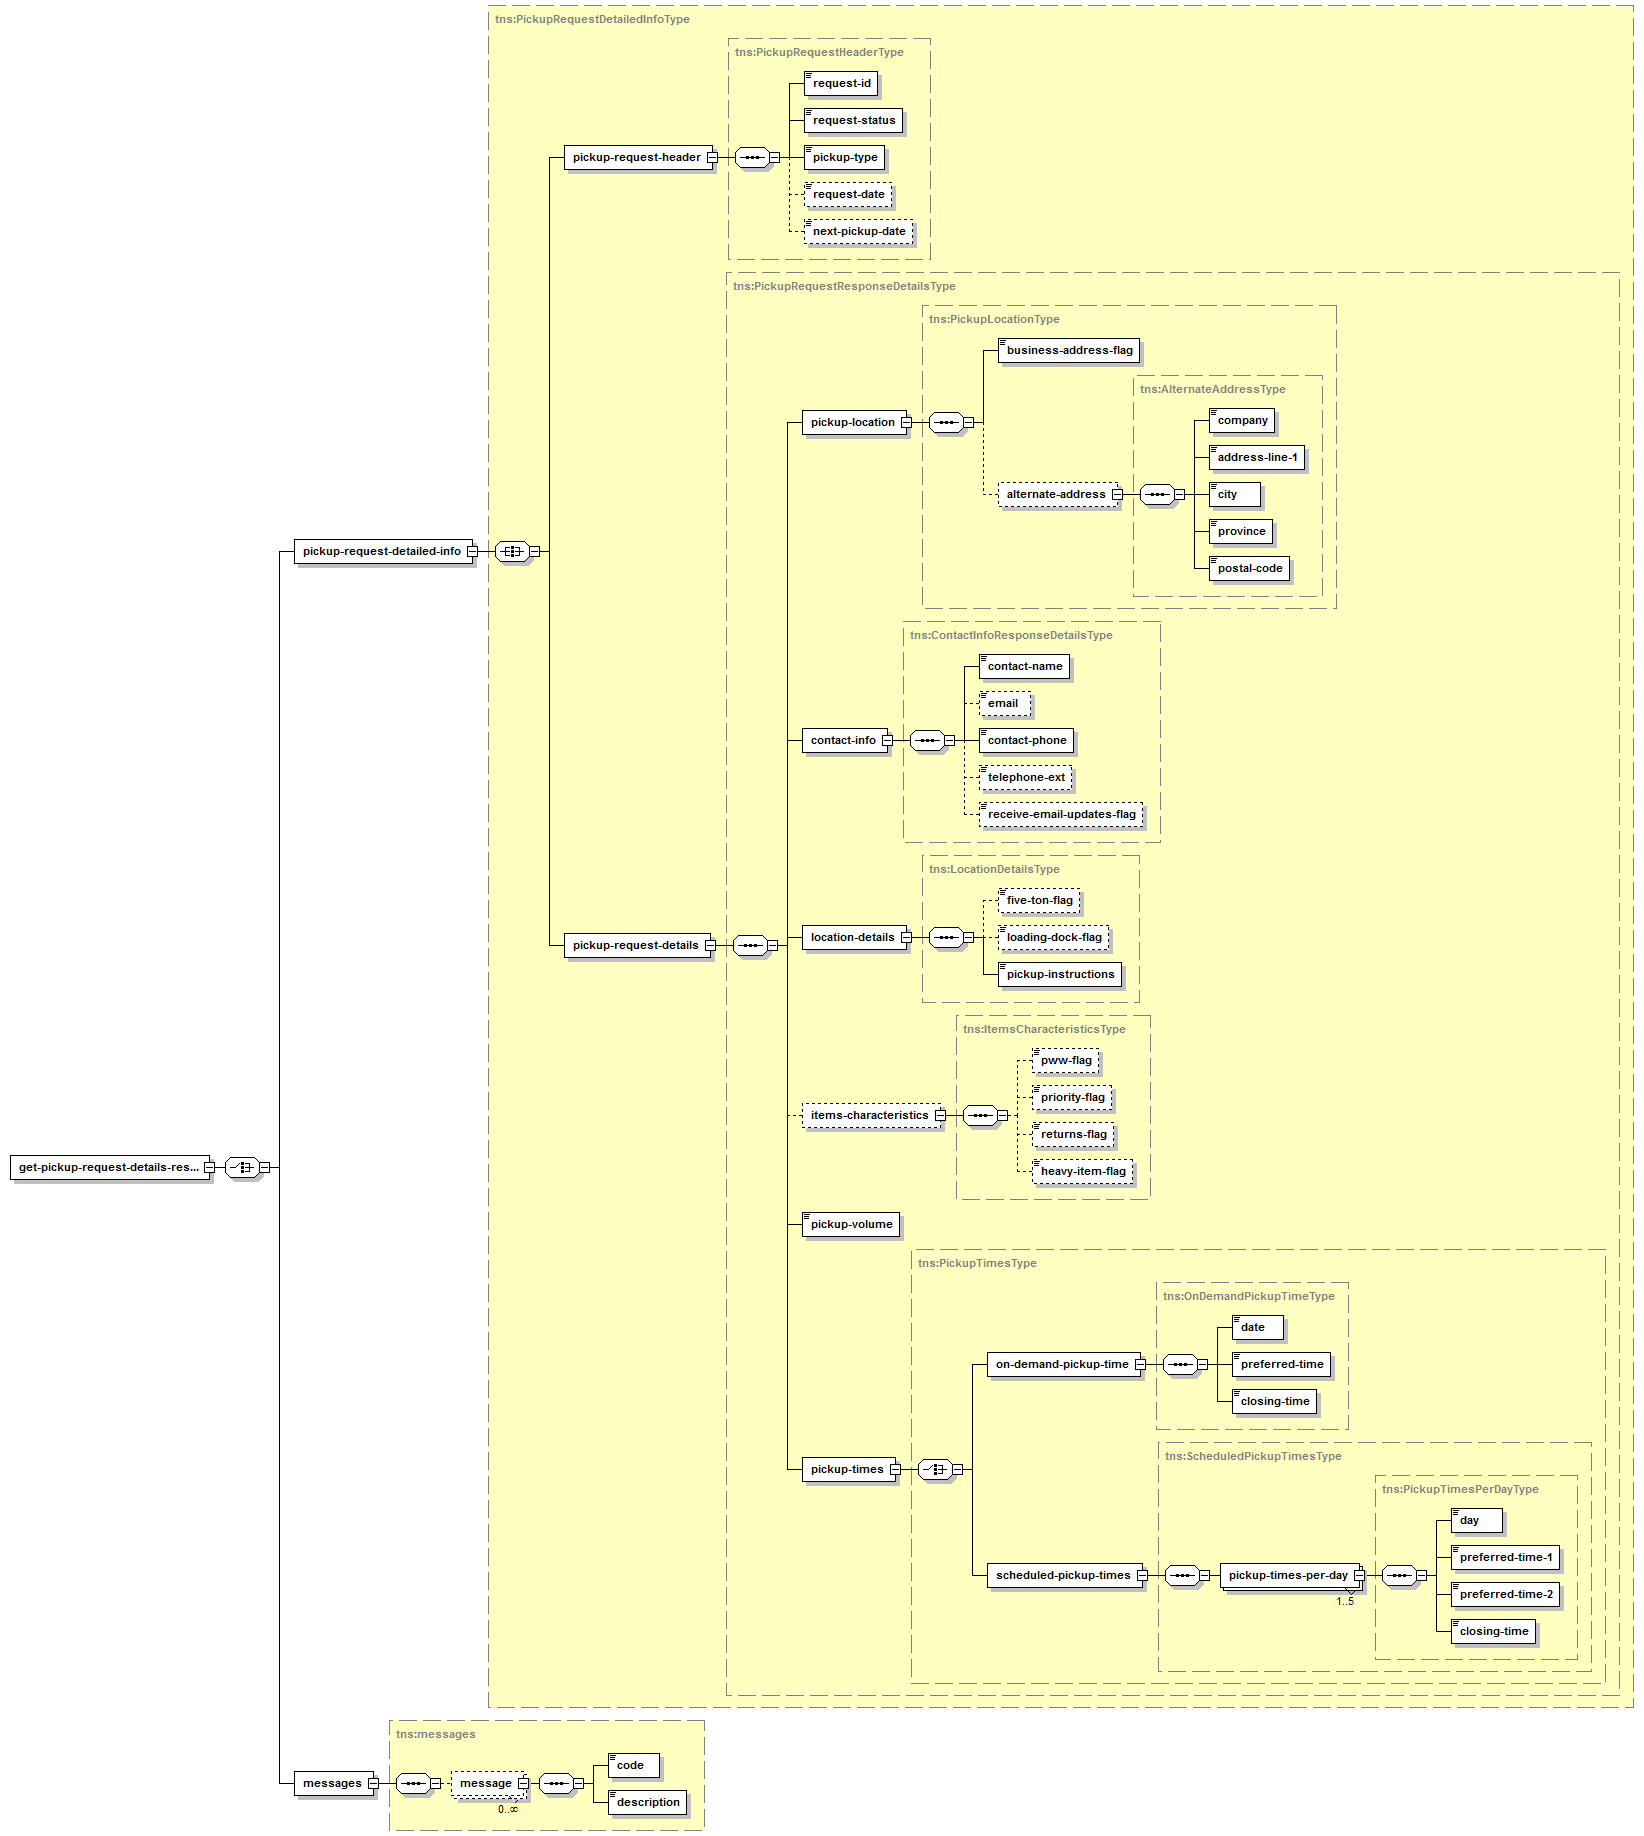 Get Pickup Request Details - Structure of the XML Response